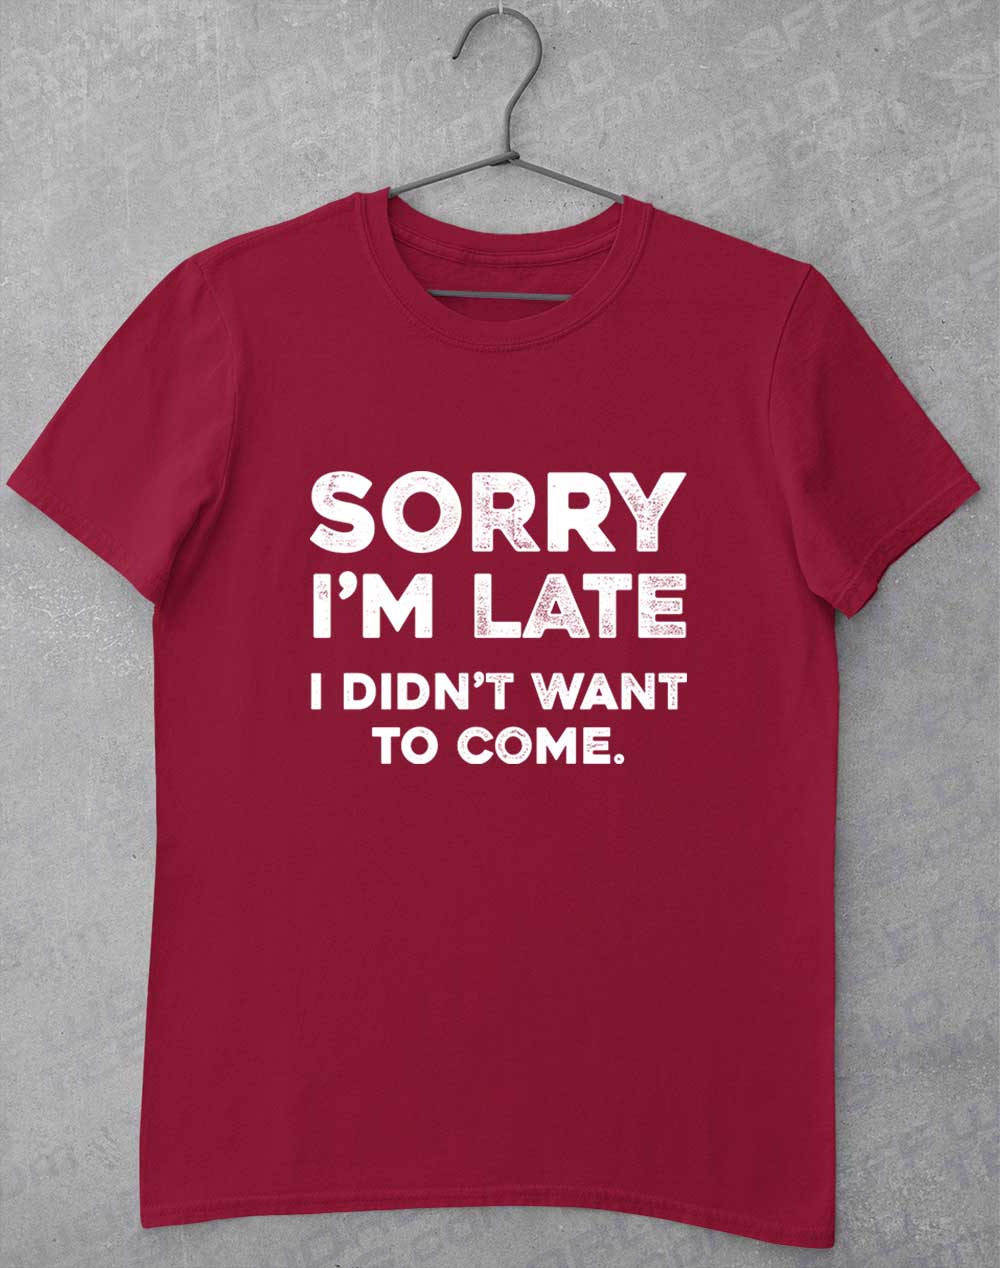 Cardinal Red - Sorry I'm Late T-Shirt